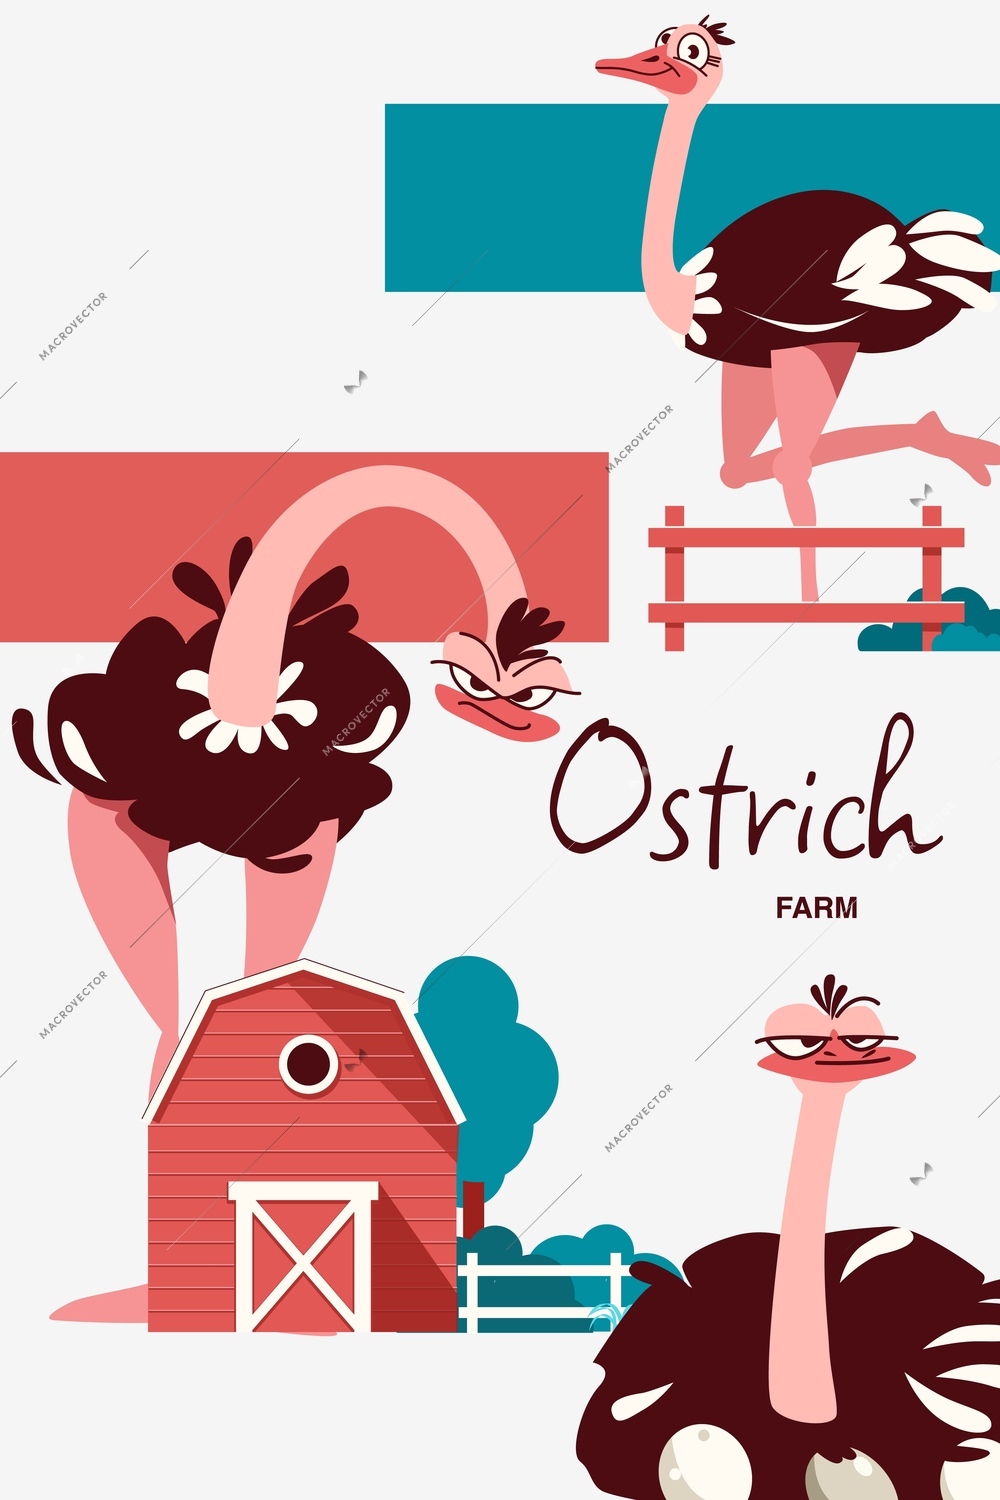 Ostrich farm vertical collage in flat style with funny birds and farmhouse vector illustration